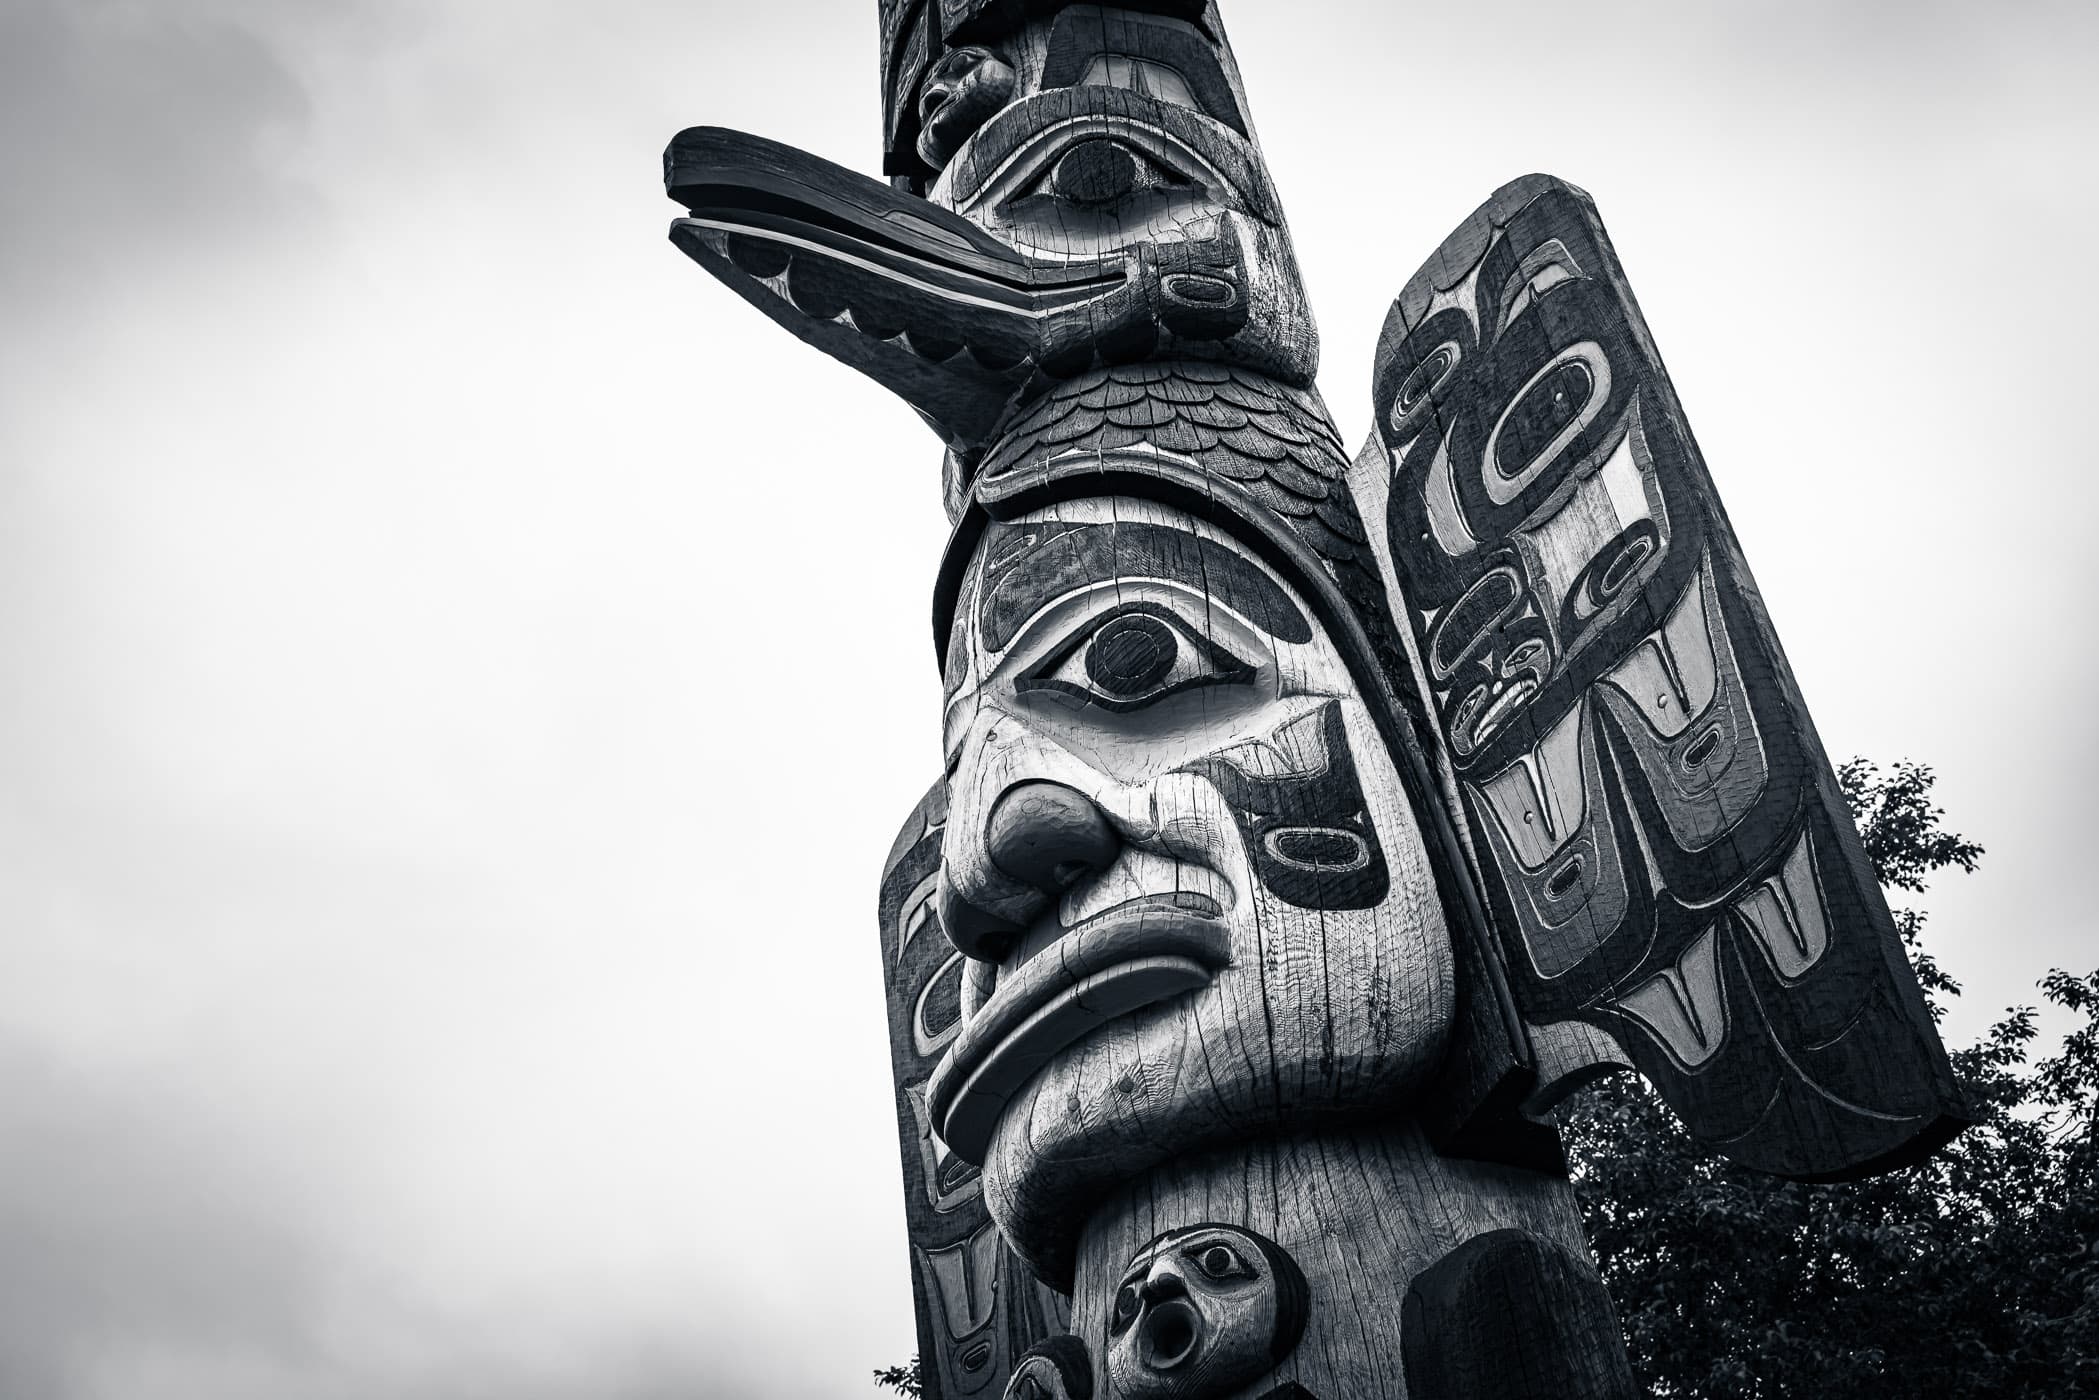 Detail of a totem pole spotted in Ketchikan, Alaska.